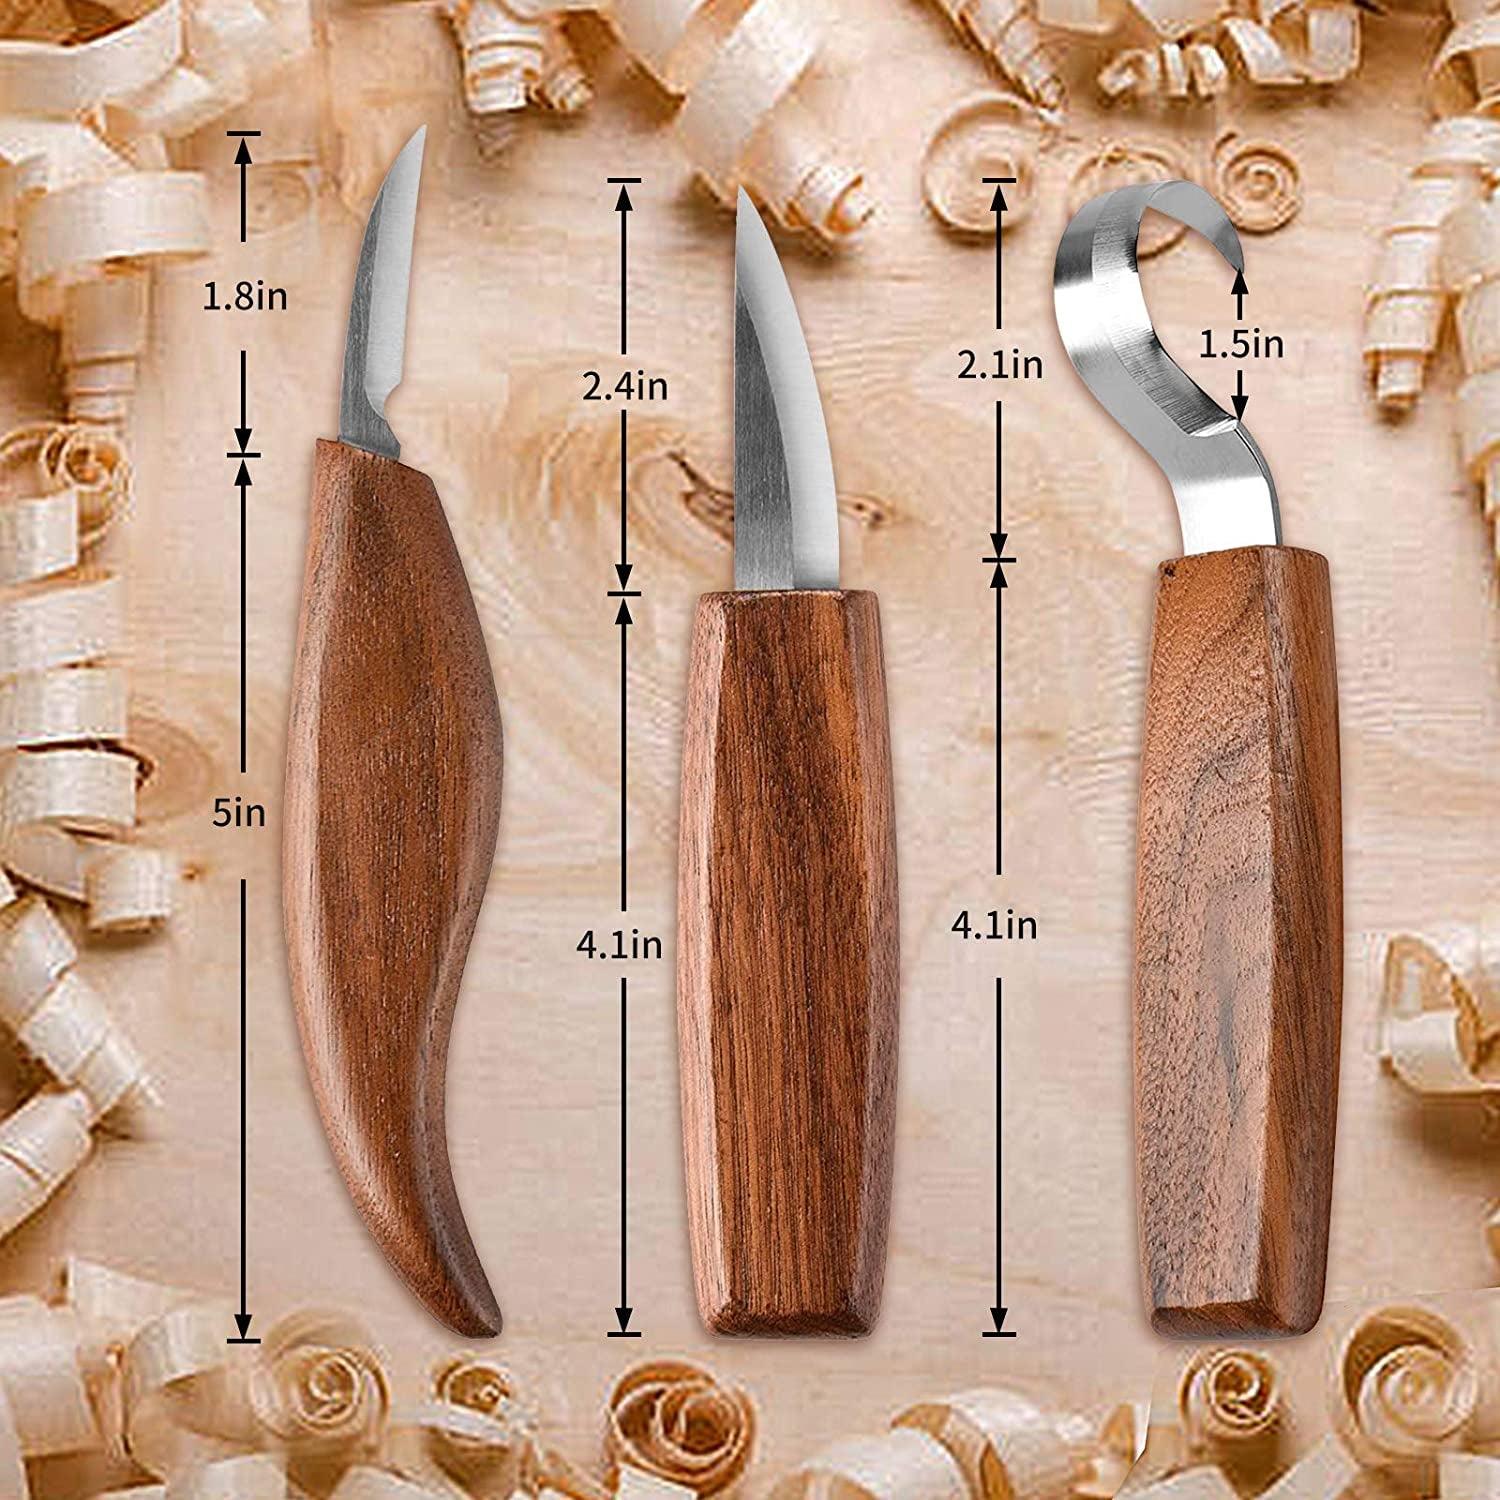 Wood Carving Tools 12-In-1 Wood Kit with Hook Knife, Whittling Knife, Chip  Knife, Gloves, Knife Sharpener for Spoon, Bowl, Kuksa Cup